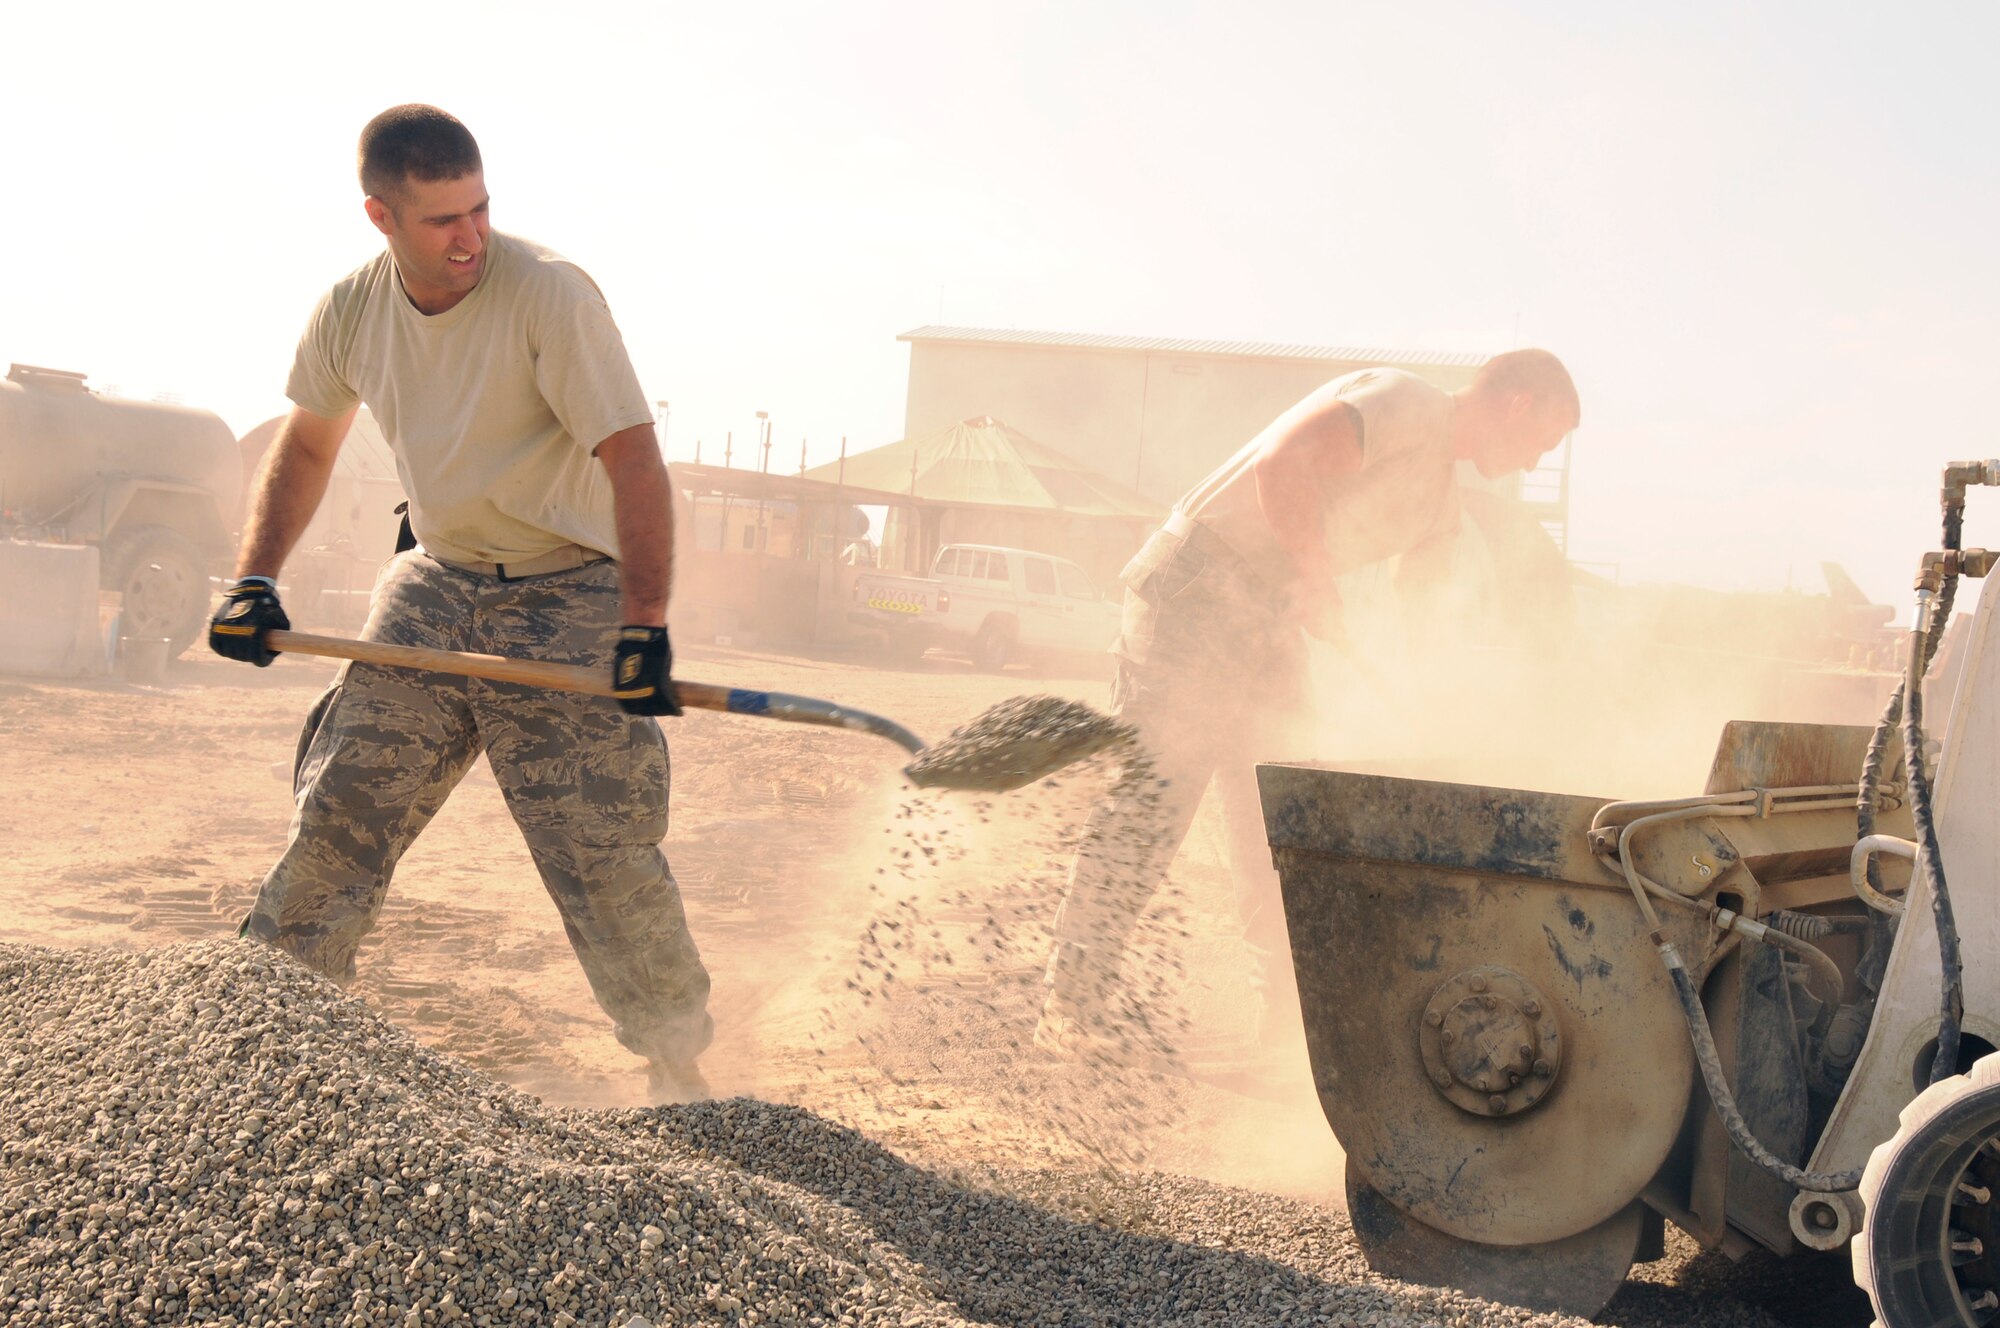 SOUTHWEST ASIA - Tech Sgt. Arthur Cronk and Airman 1st Class David Roberts, 380th Expeditionary Civil Engineer Squadron, pavement and heavy equipment operator's shovel gravel for a concrete mix into a Bobcat loader, Feb 5. The concrete mixture is 1 part cement, 2 parts sand and 3 parts gravel. When finished the concrete slab will be used for a food storage area for the new dining facility at the 380th Air Expeditionary Wing. Sergeant Cronk is deployed from Andrews AFB, Md. and hails from Great Falls, Mo. Airman Roberts is deployed from Bolling AFB, DC and hails from Bristol, Tenn.(U.S. Air Force photo by Senior Airman Brian J. Ellis) (Released)